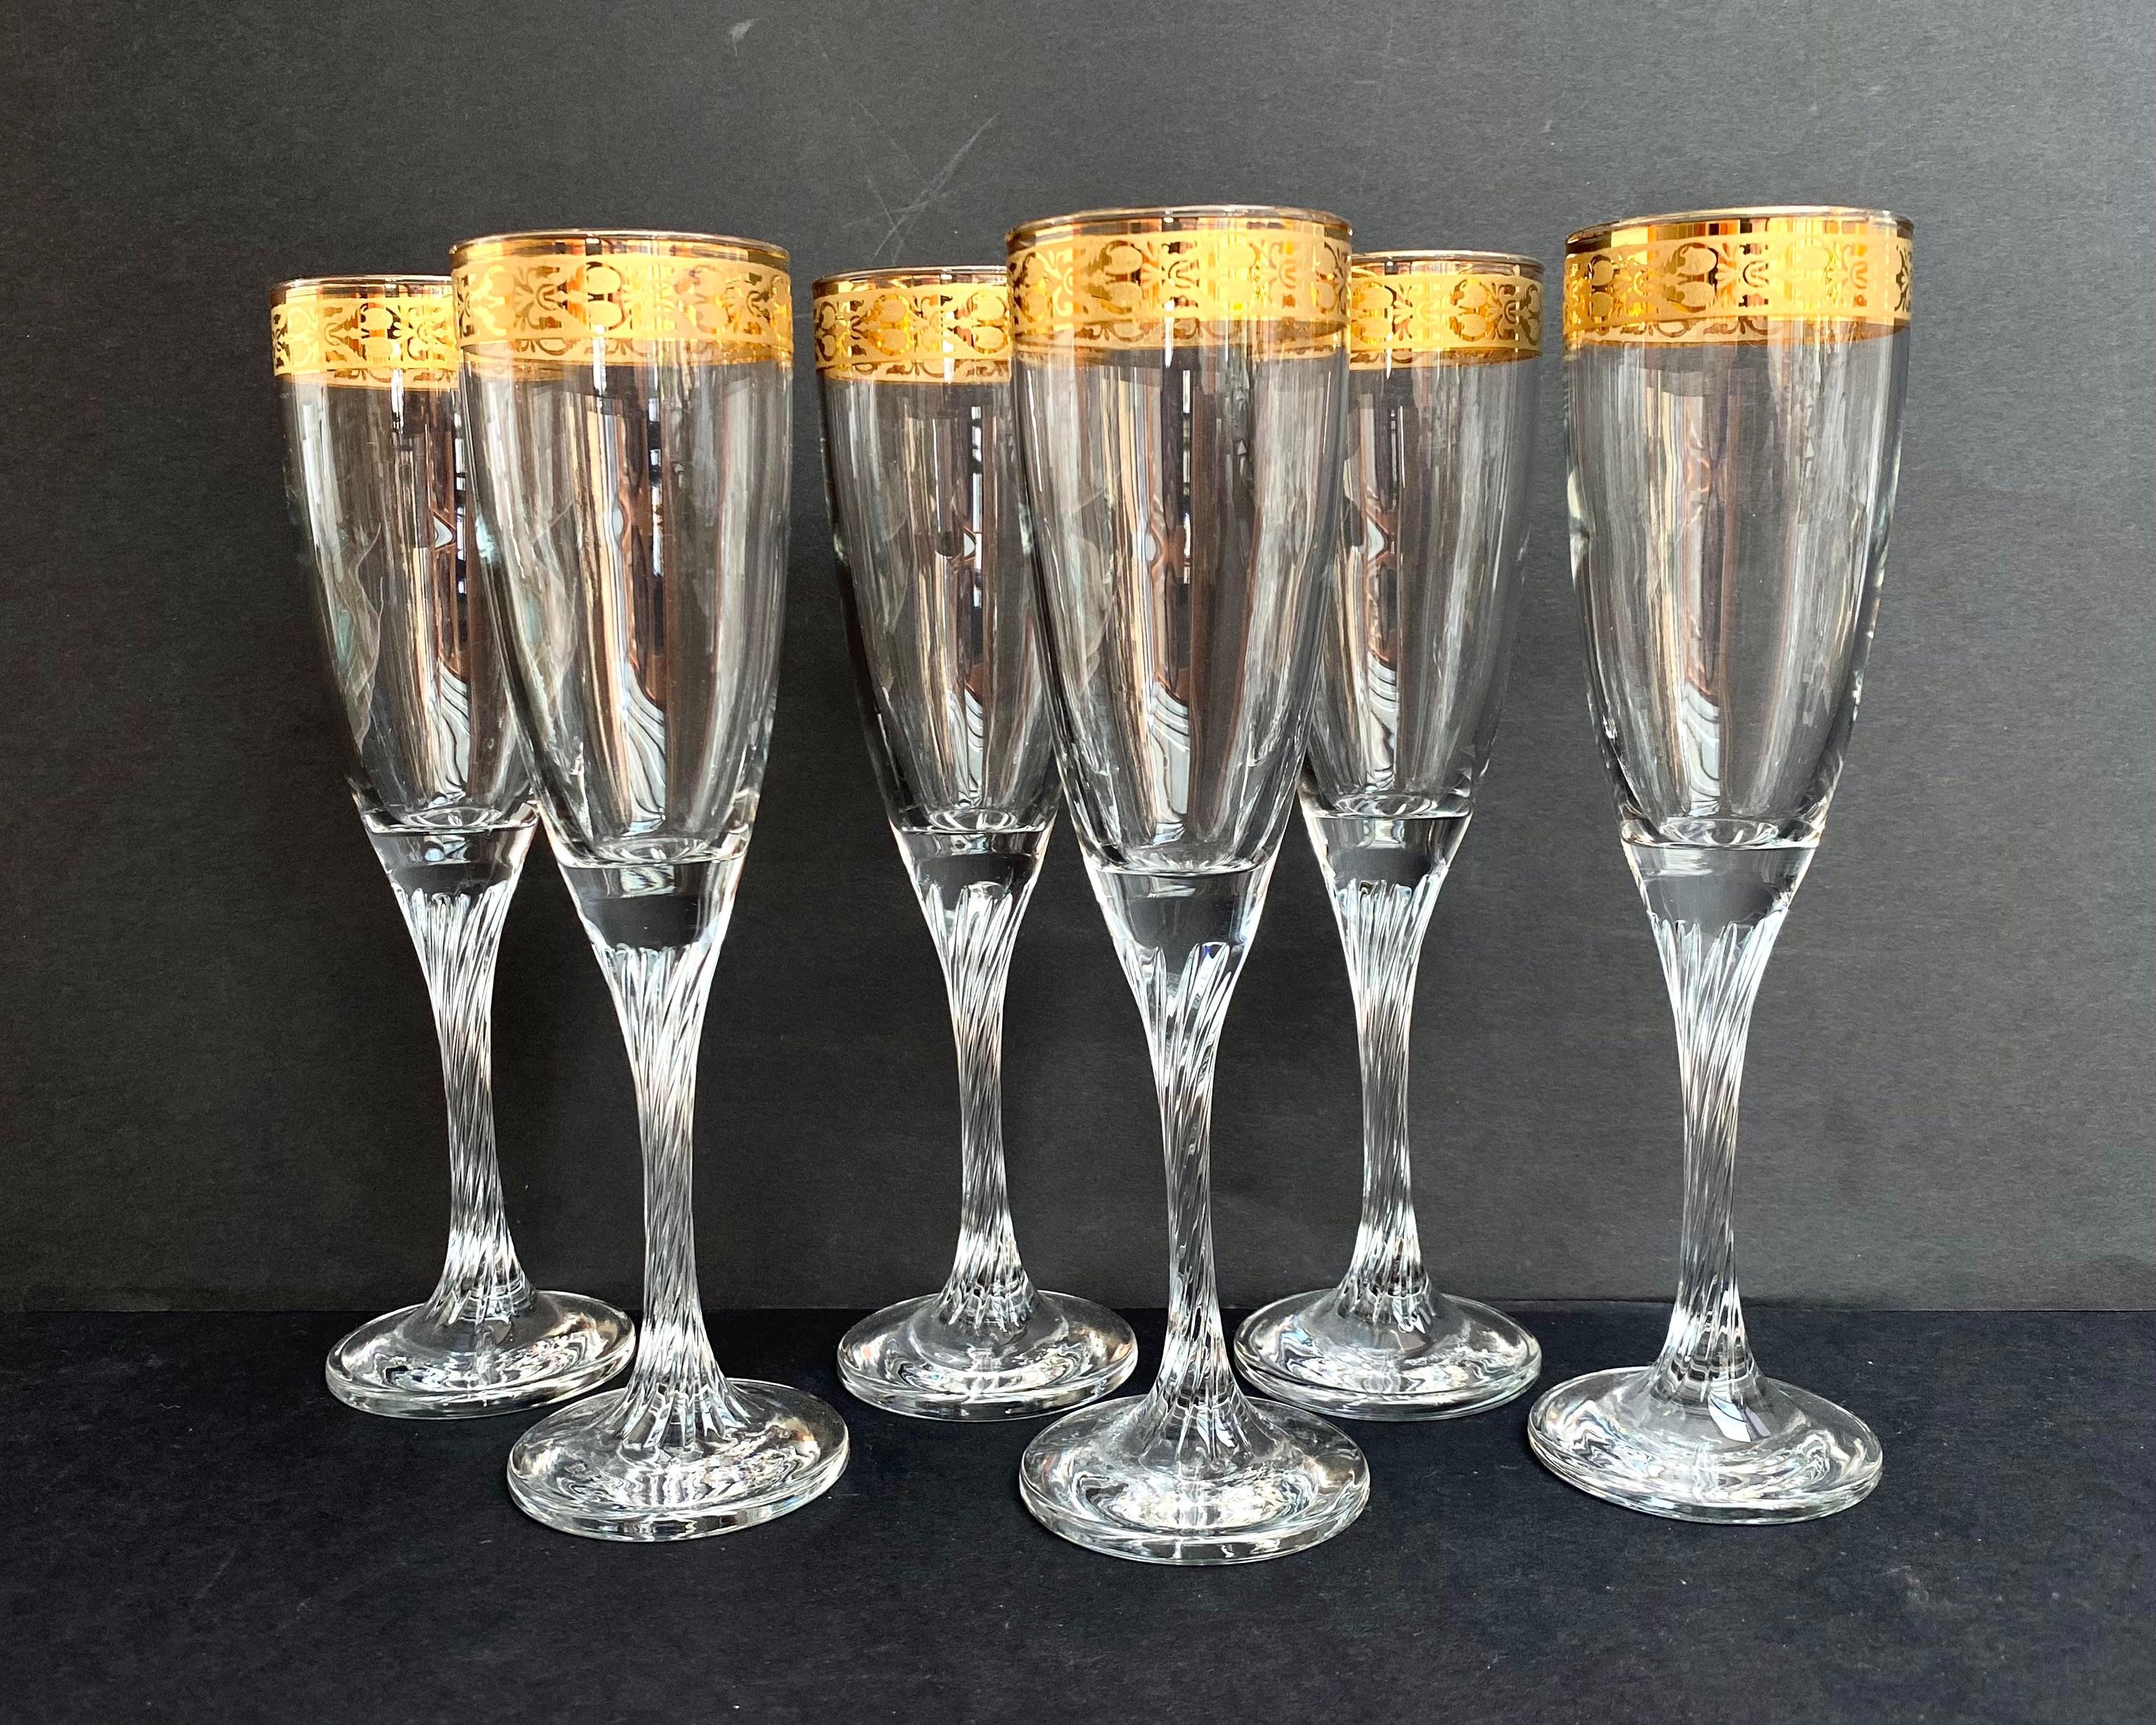 Stunning set of 6 crystal glasses with gold rim. Manufactured in Germany, 1970s.

The set consists of six vintage glasses made of durable crystal.

The products are equipped with high legs. Glasses are designed for serving champagne or other